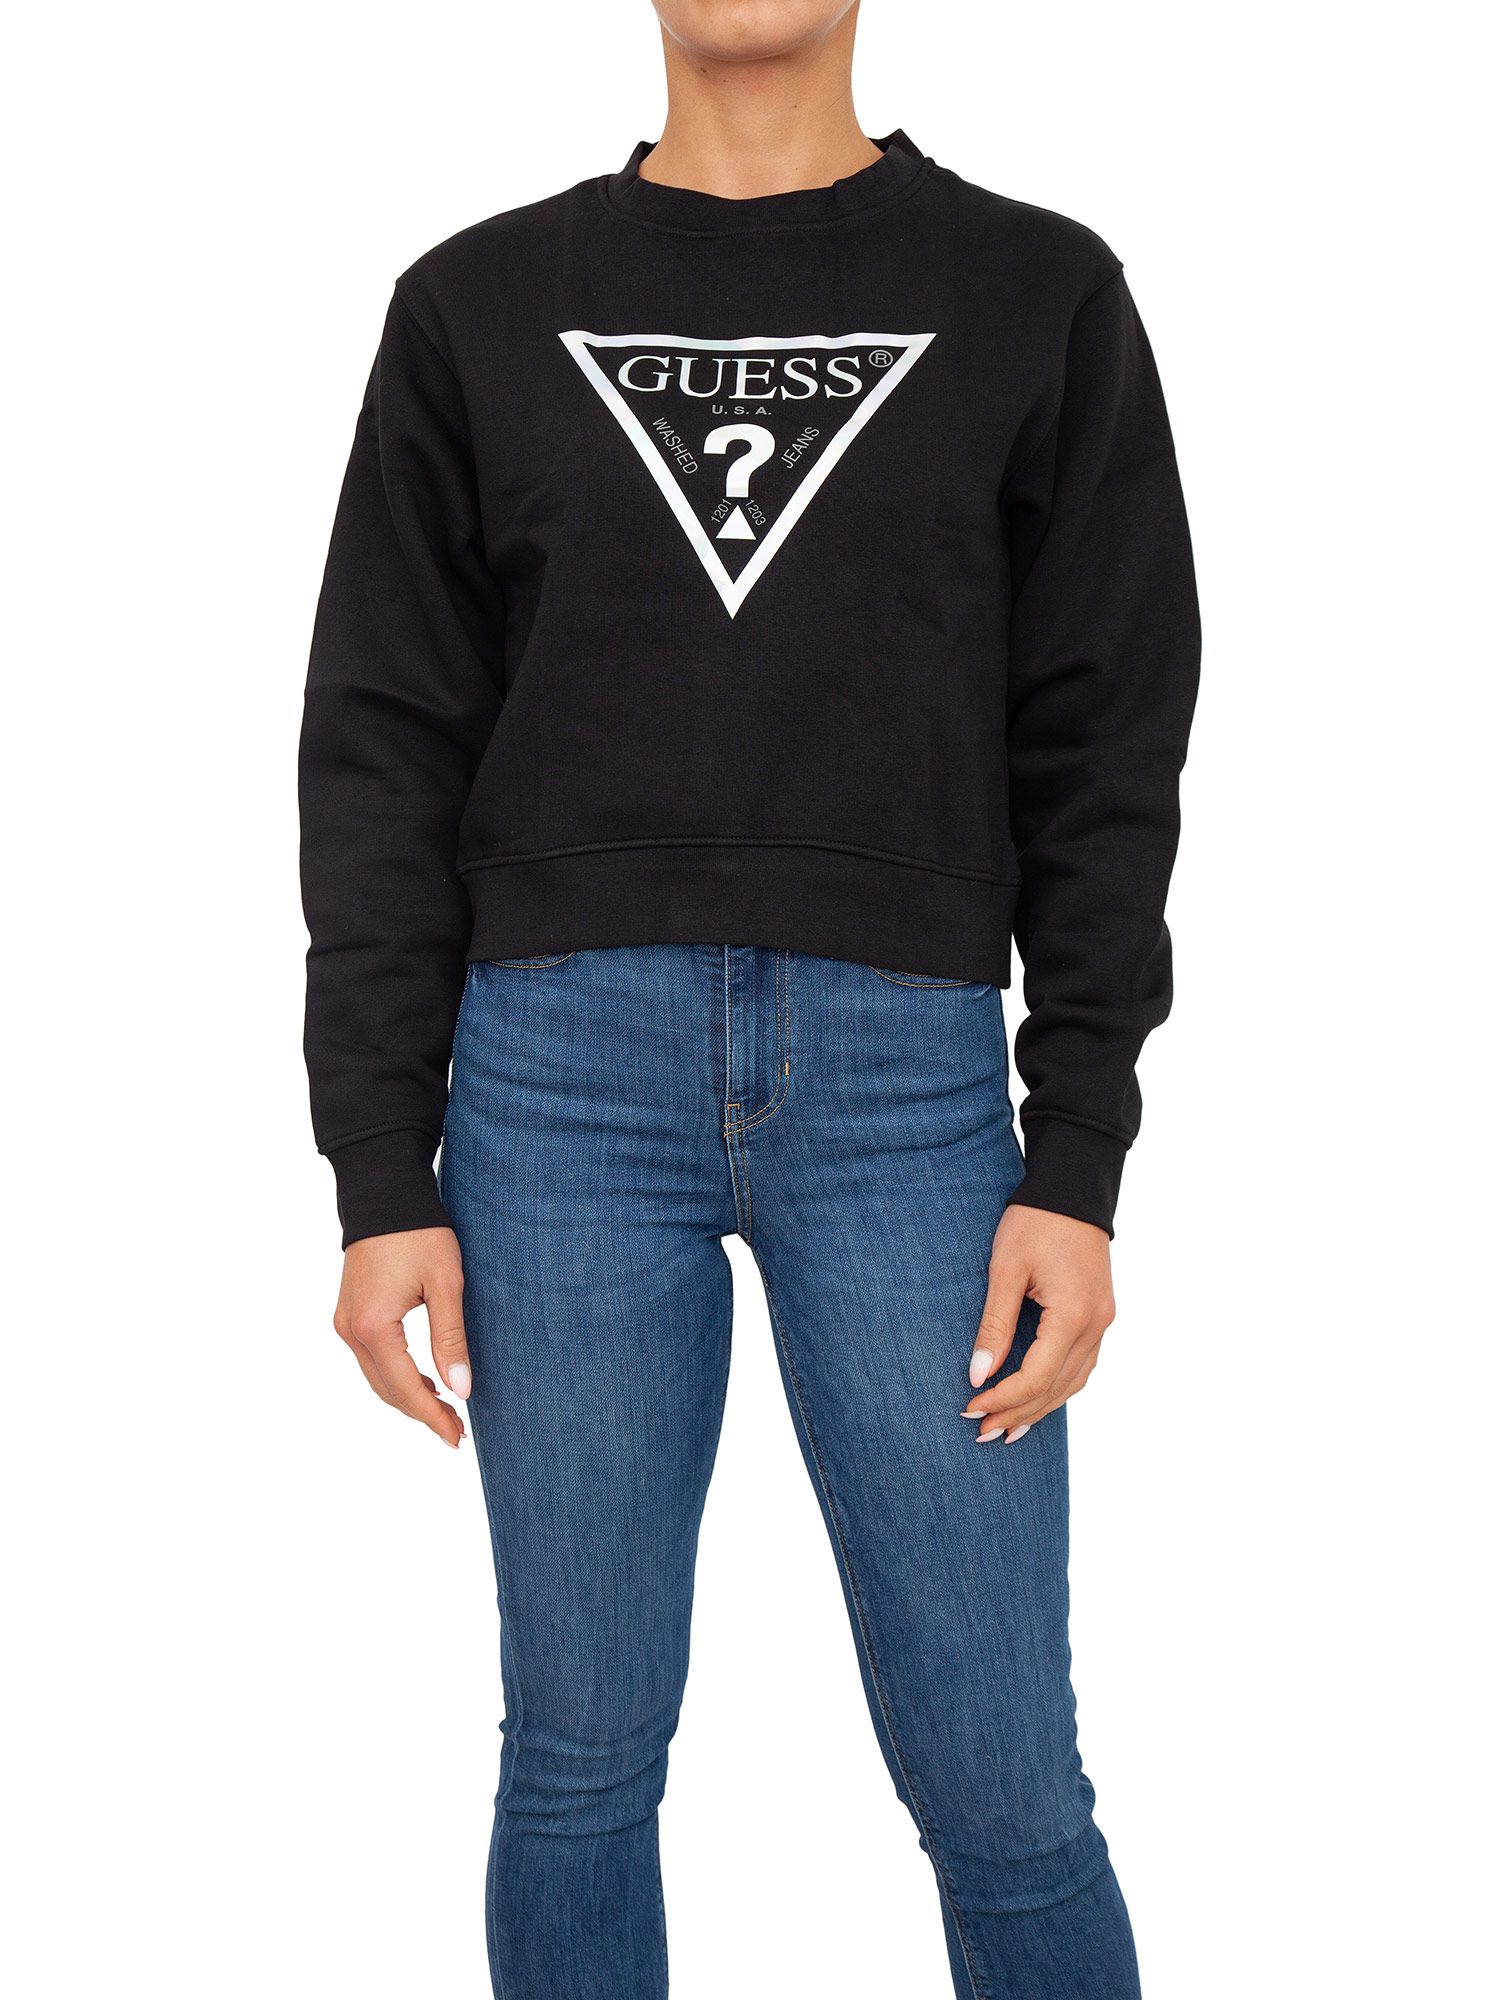 FELPA GUESS JEANS NERO - Glamour Store